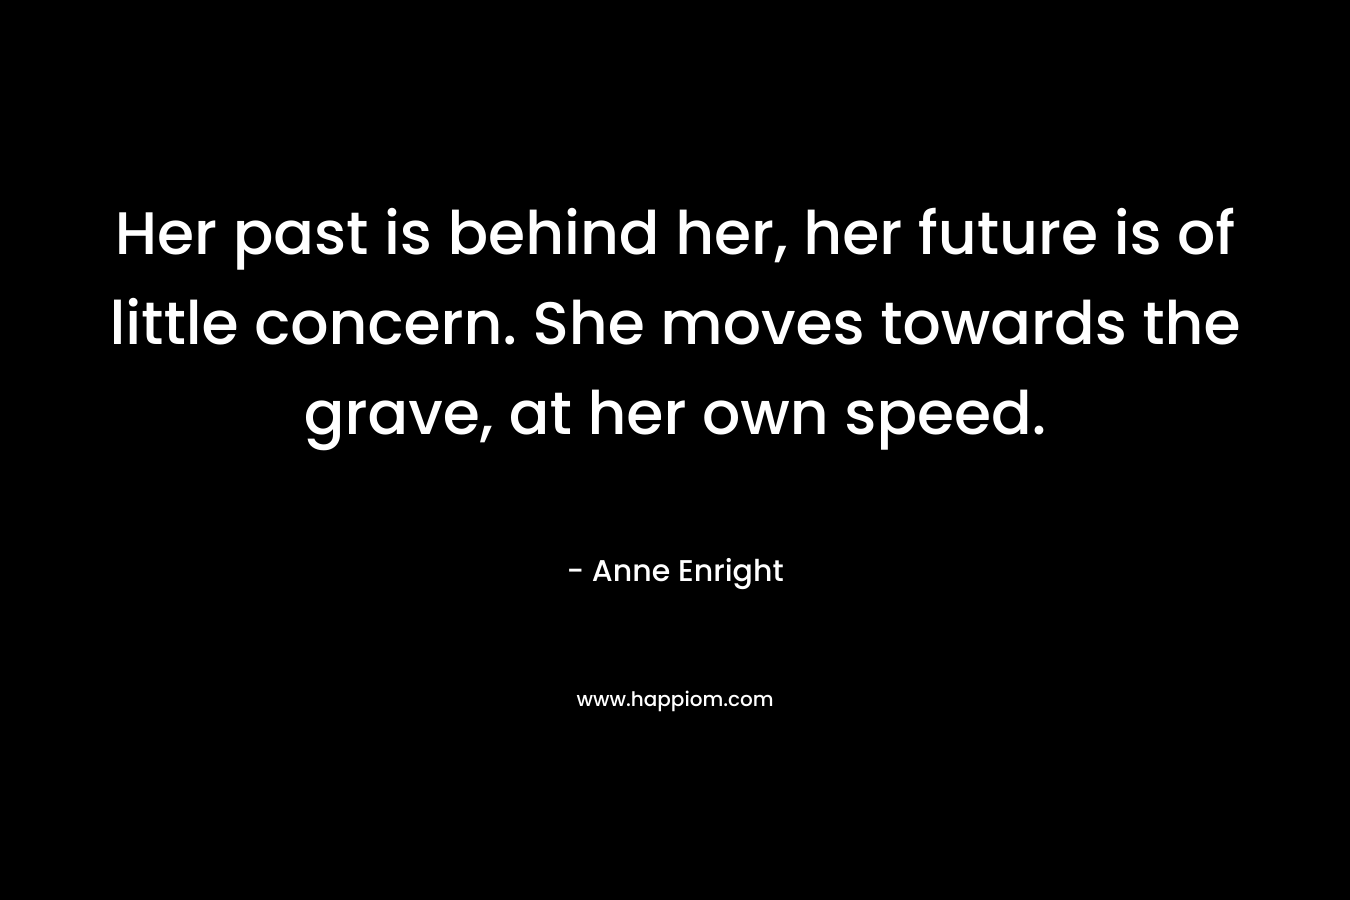 Her past is behind her, her future is of little concern. She moves towards the grave, at her own speed. – Anne Enright